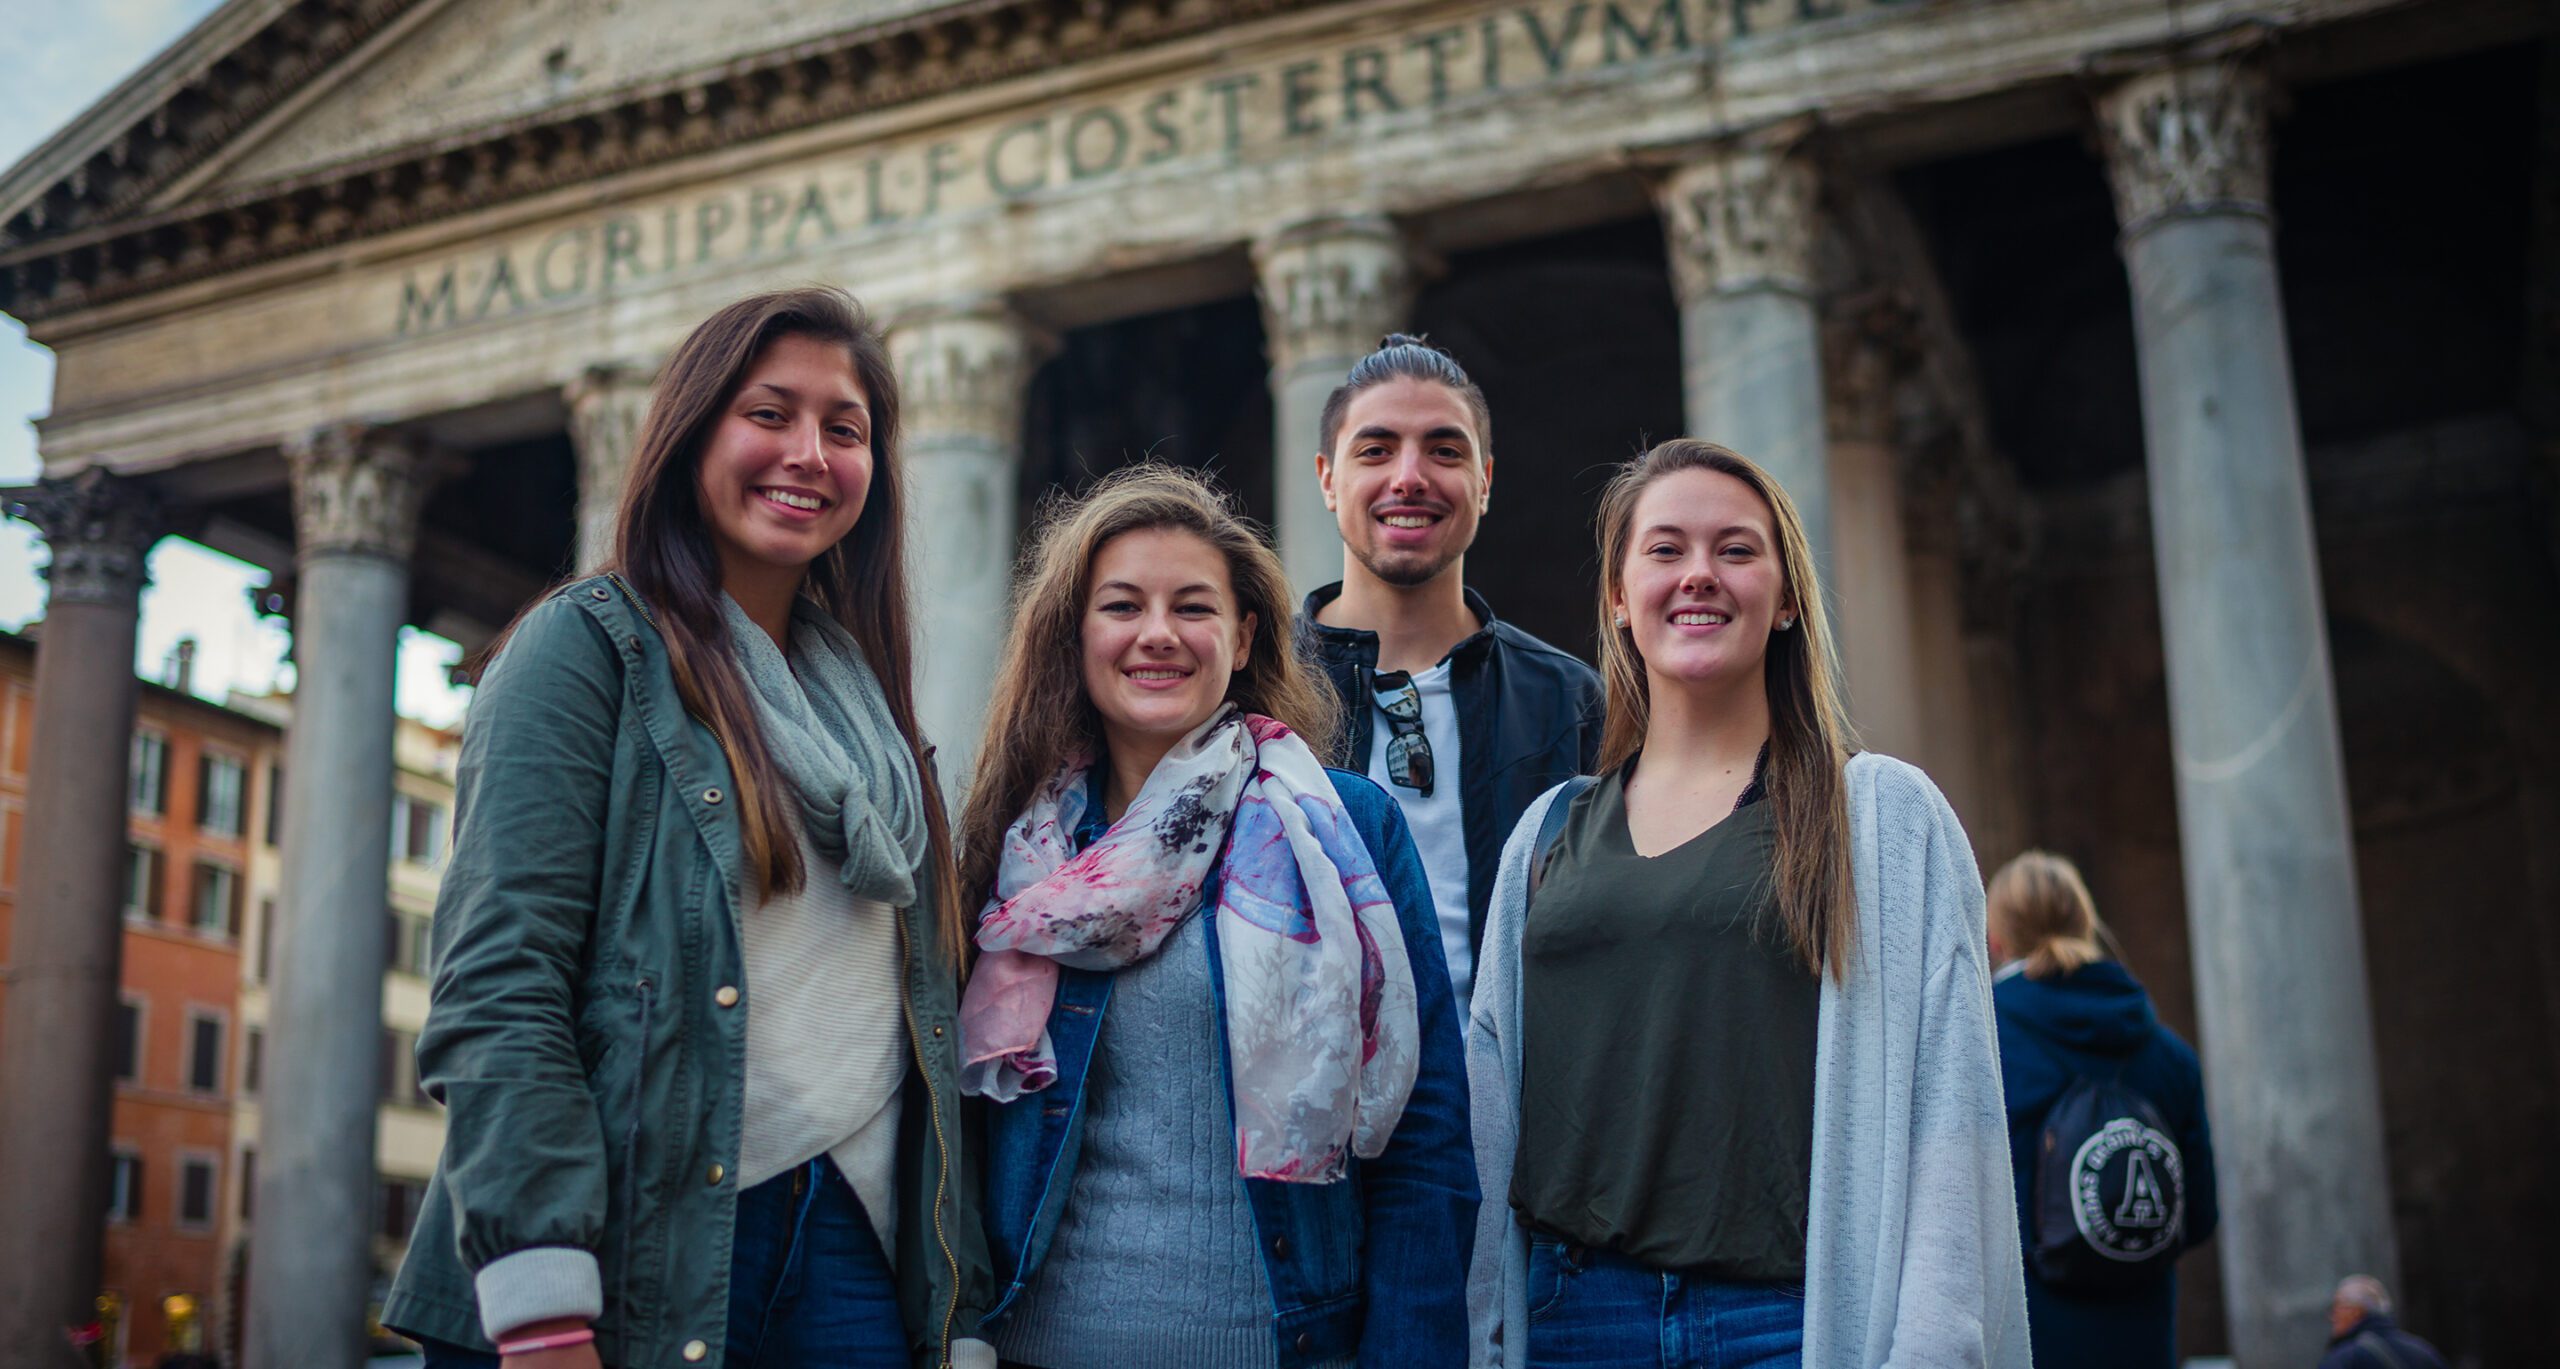 Assumption students studying in Rome, Italy.